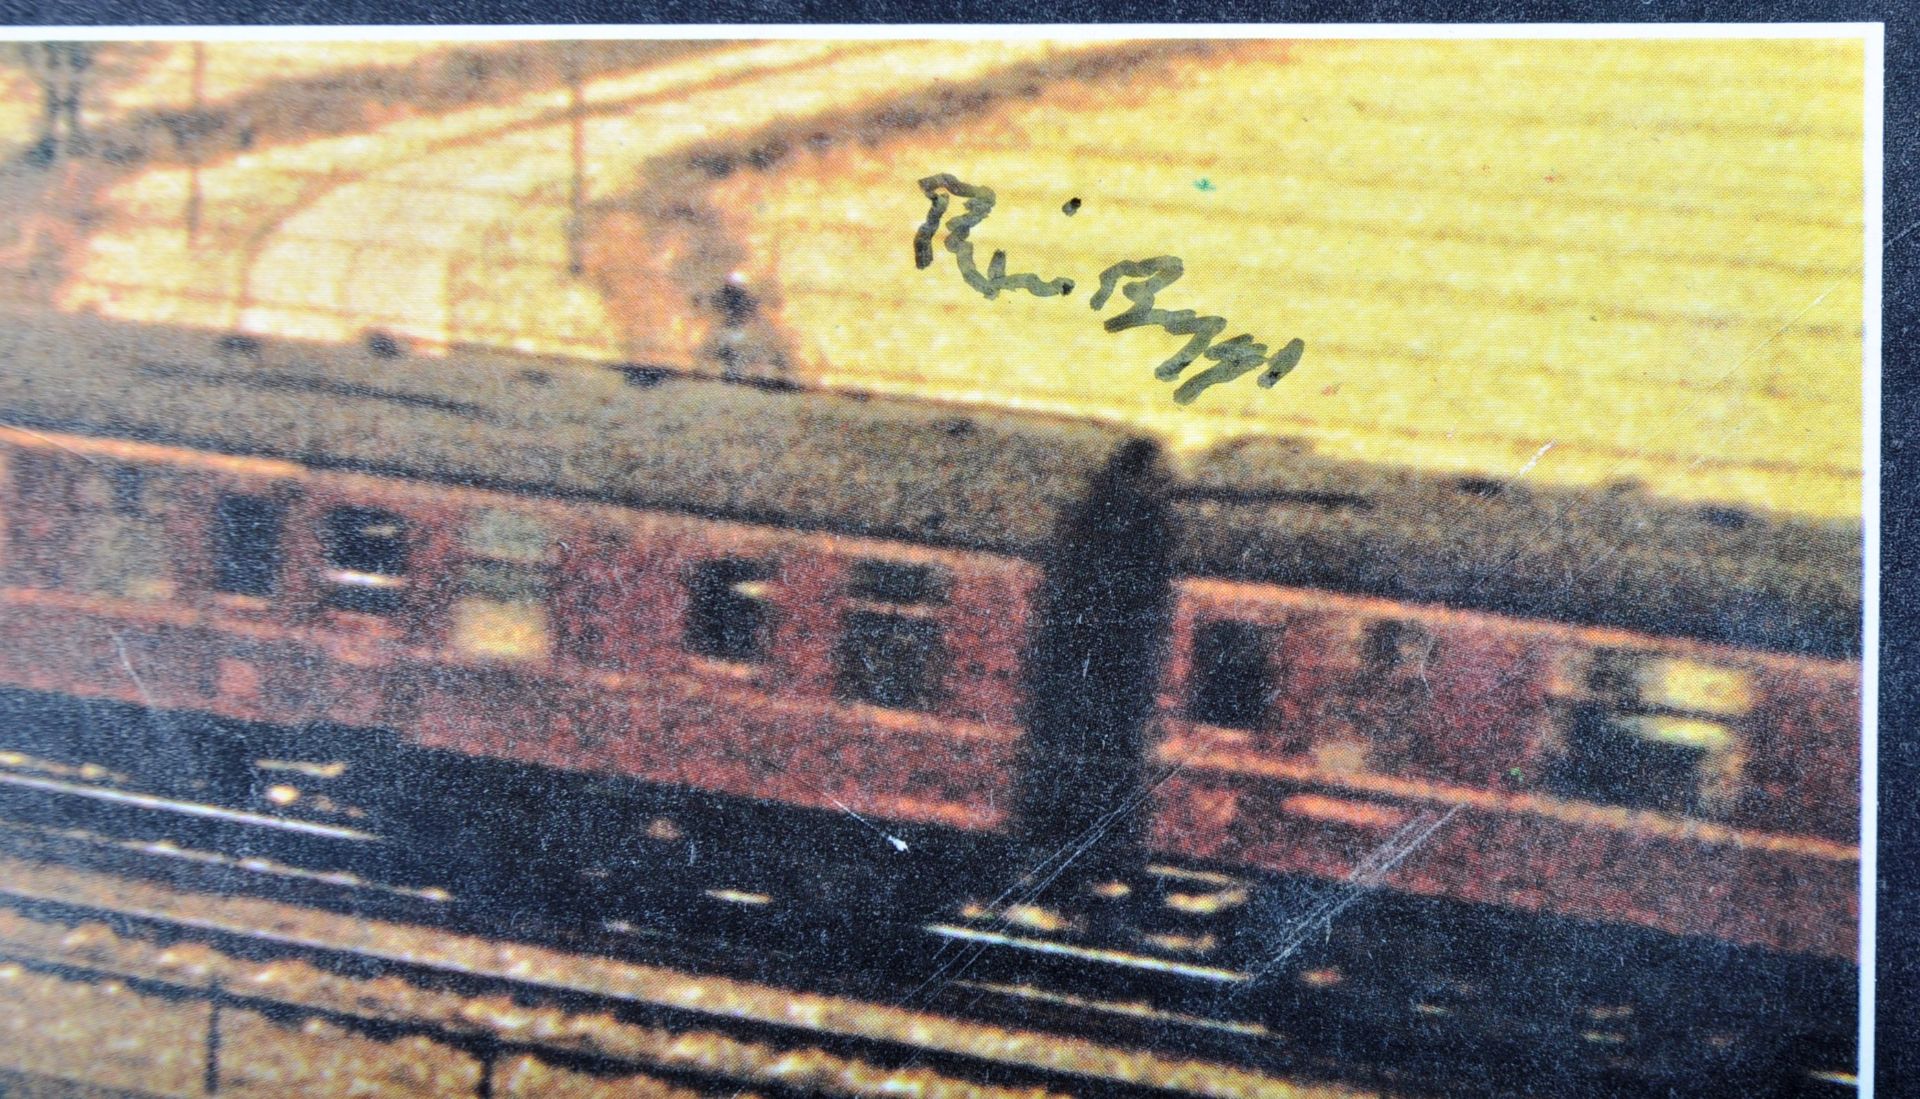 A COLLECTION OF AUTOGRAPHED GREAT TRAIN ROBBERY MEMORABILIA - Image 3 of 5